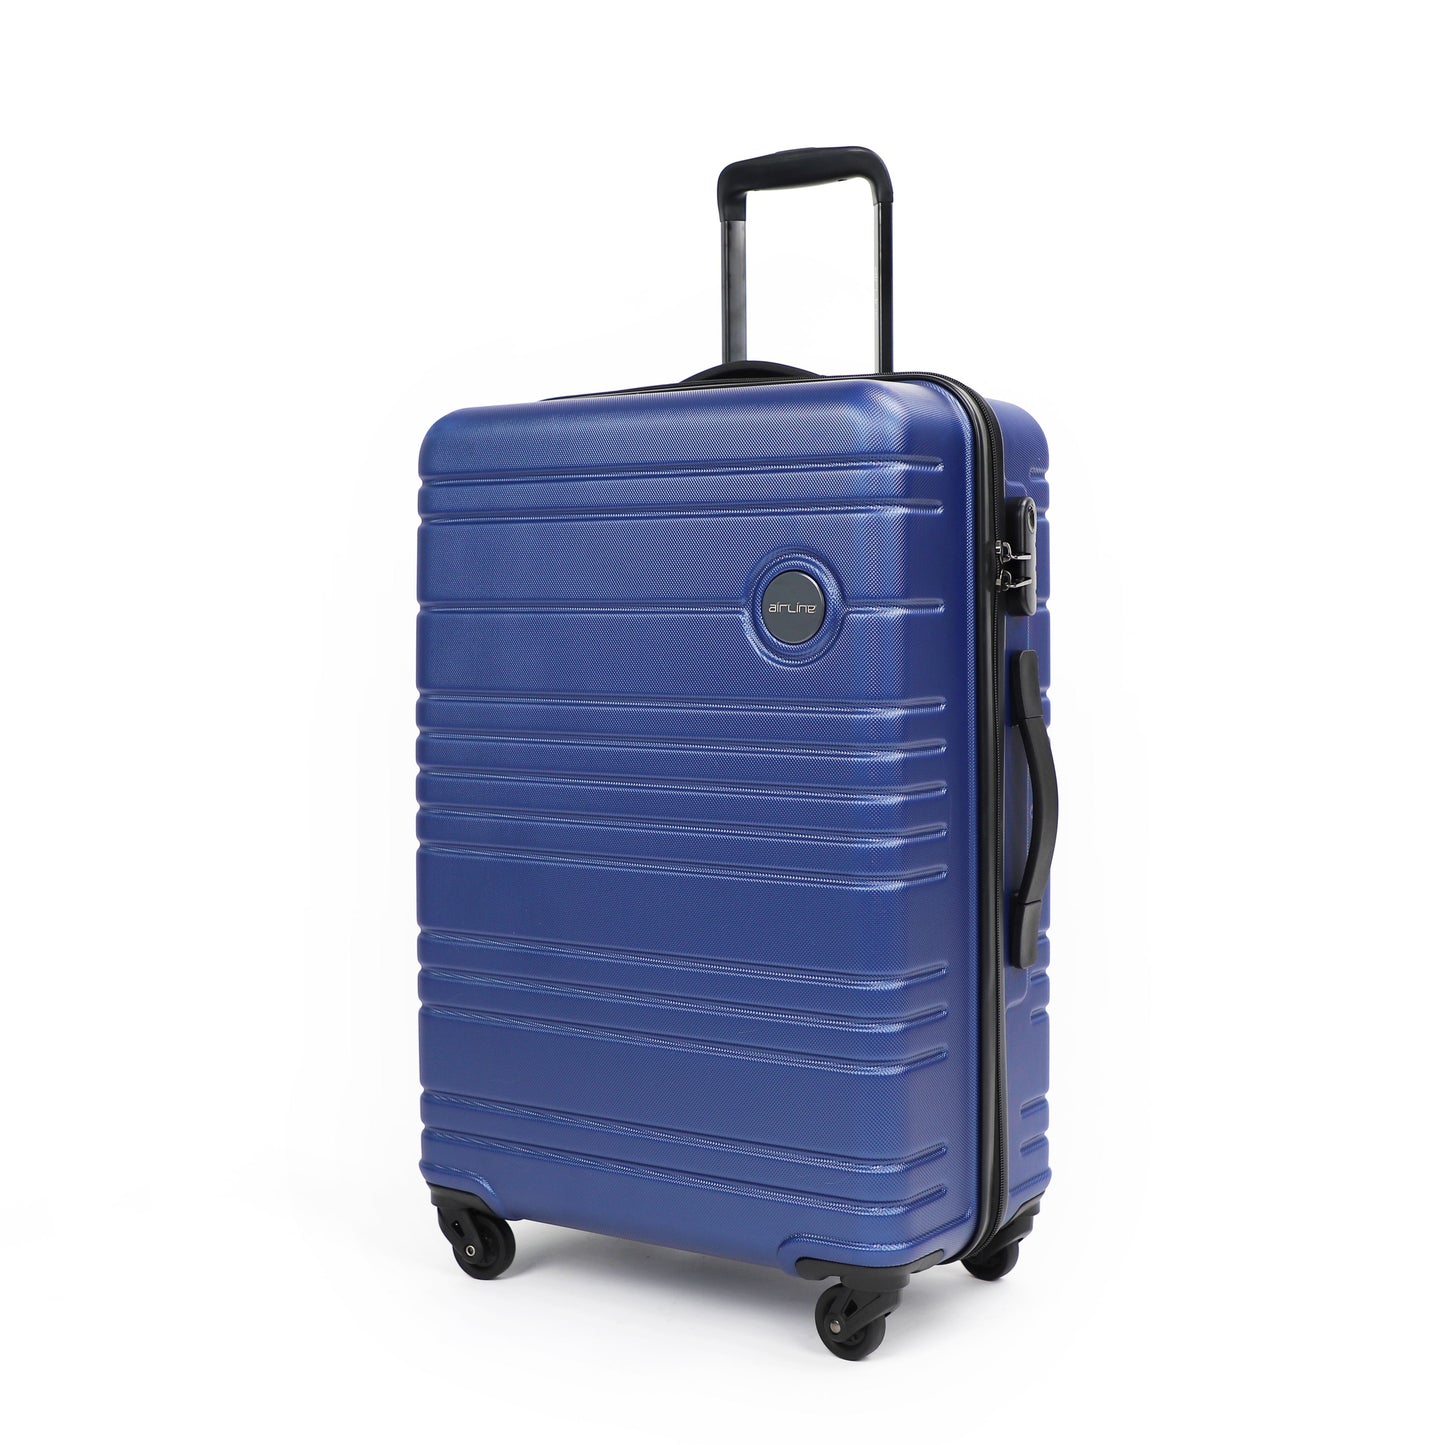 Airline_Luggage_Sets_3peice_Blue_Side_view_N12721005